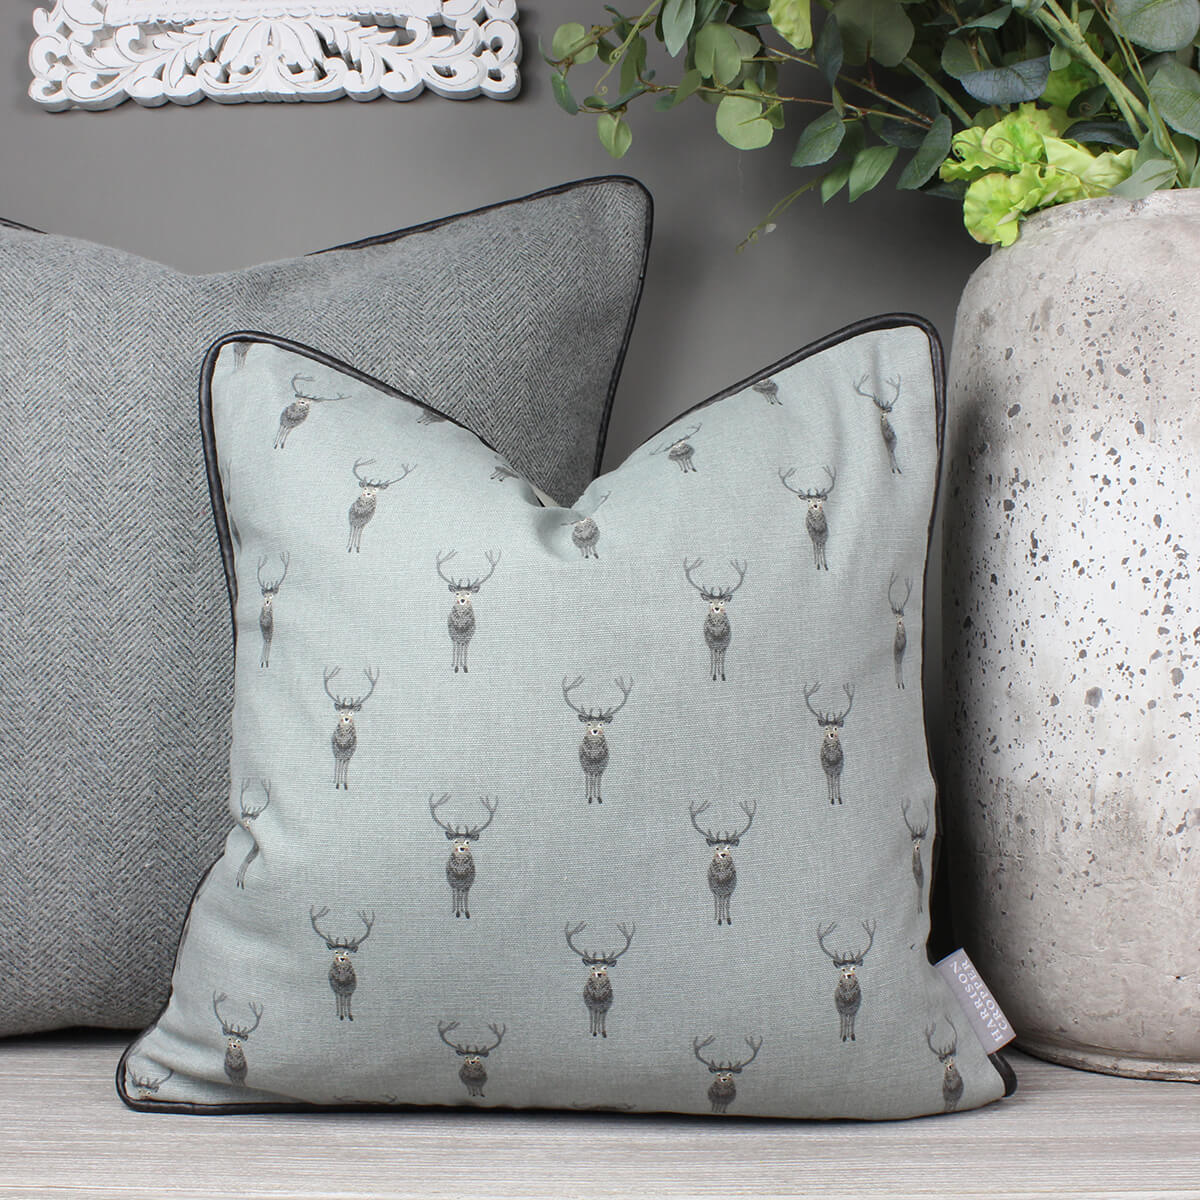 Stag Sophie Allport Fabric Cushion